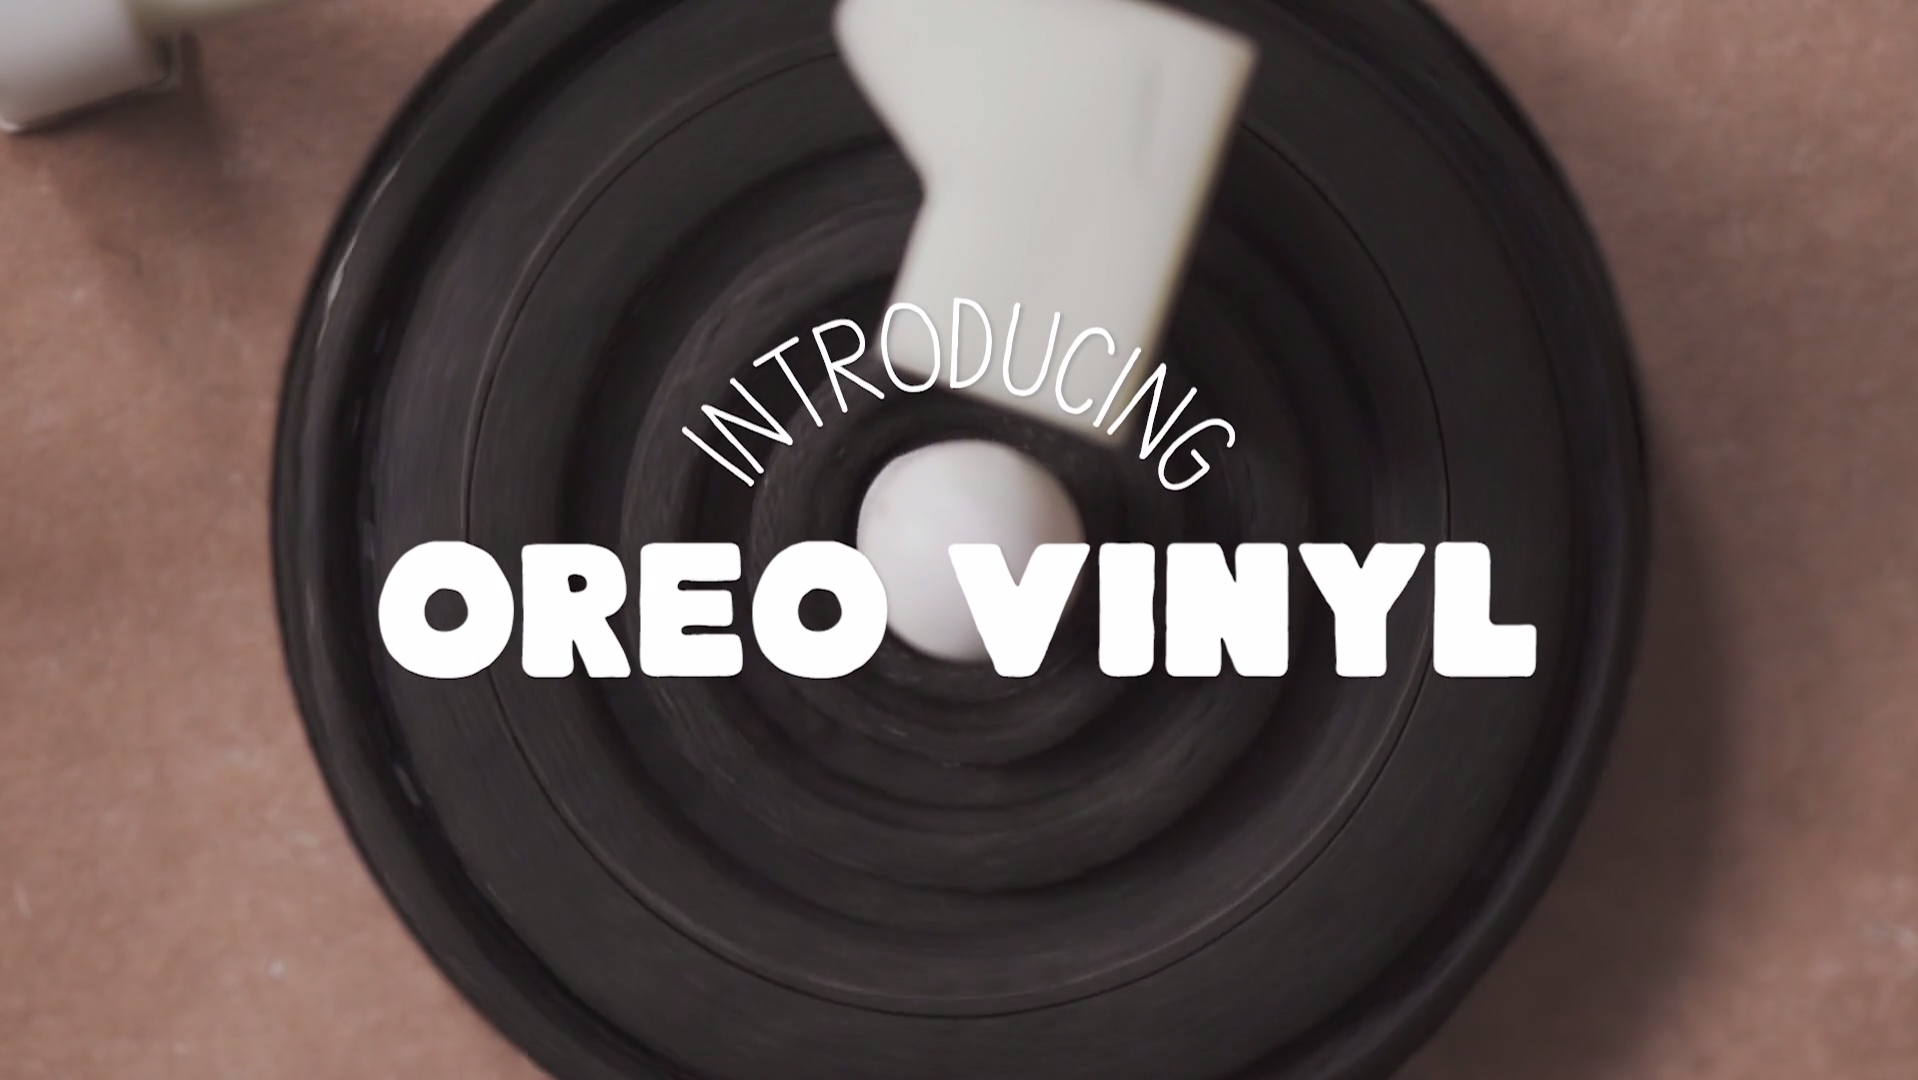 Forget vinyl, in the future we play records made of Oreo Cookies